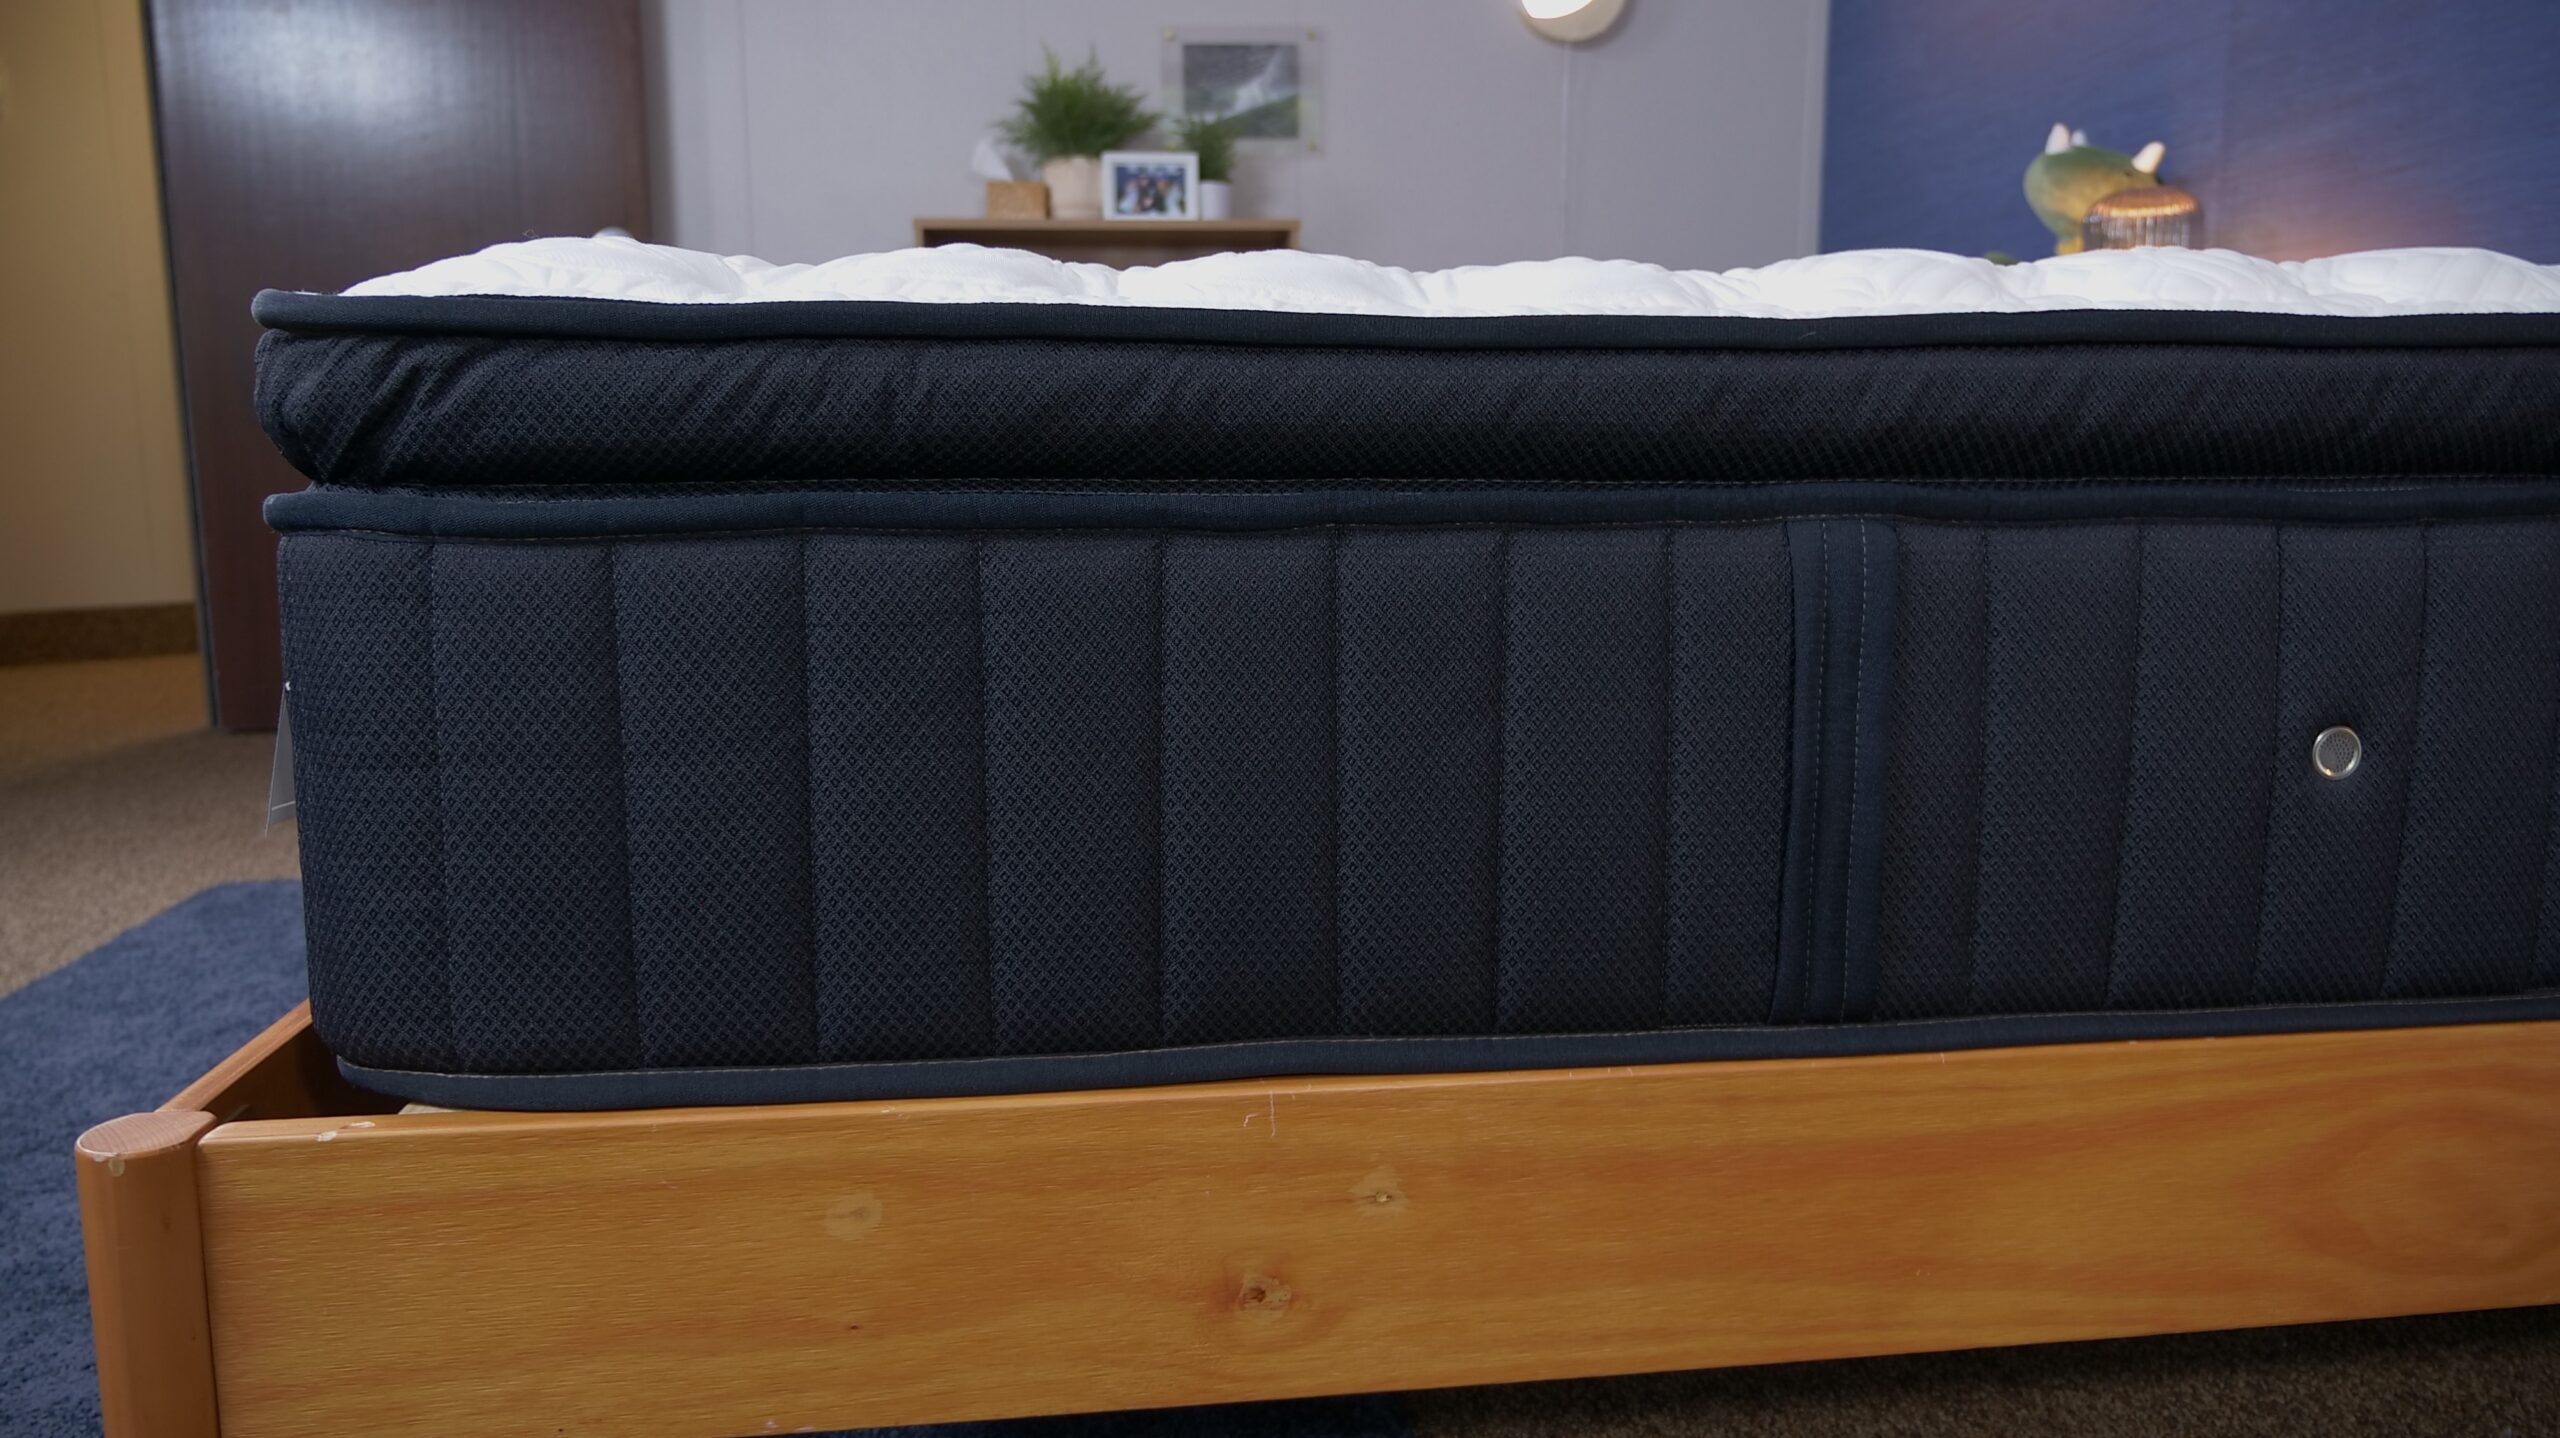 Moving handles and AirVent System on the Stearns & Foster Kirkland Signature Lakeridge Mattress